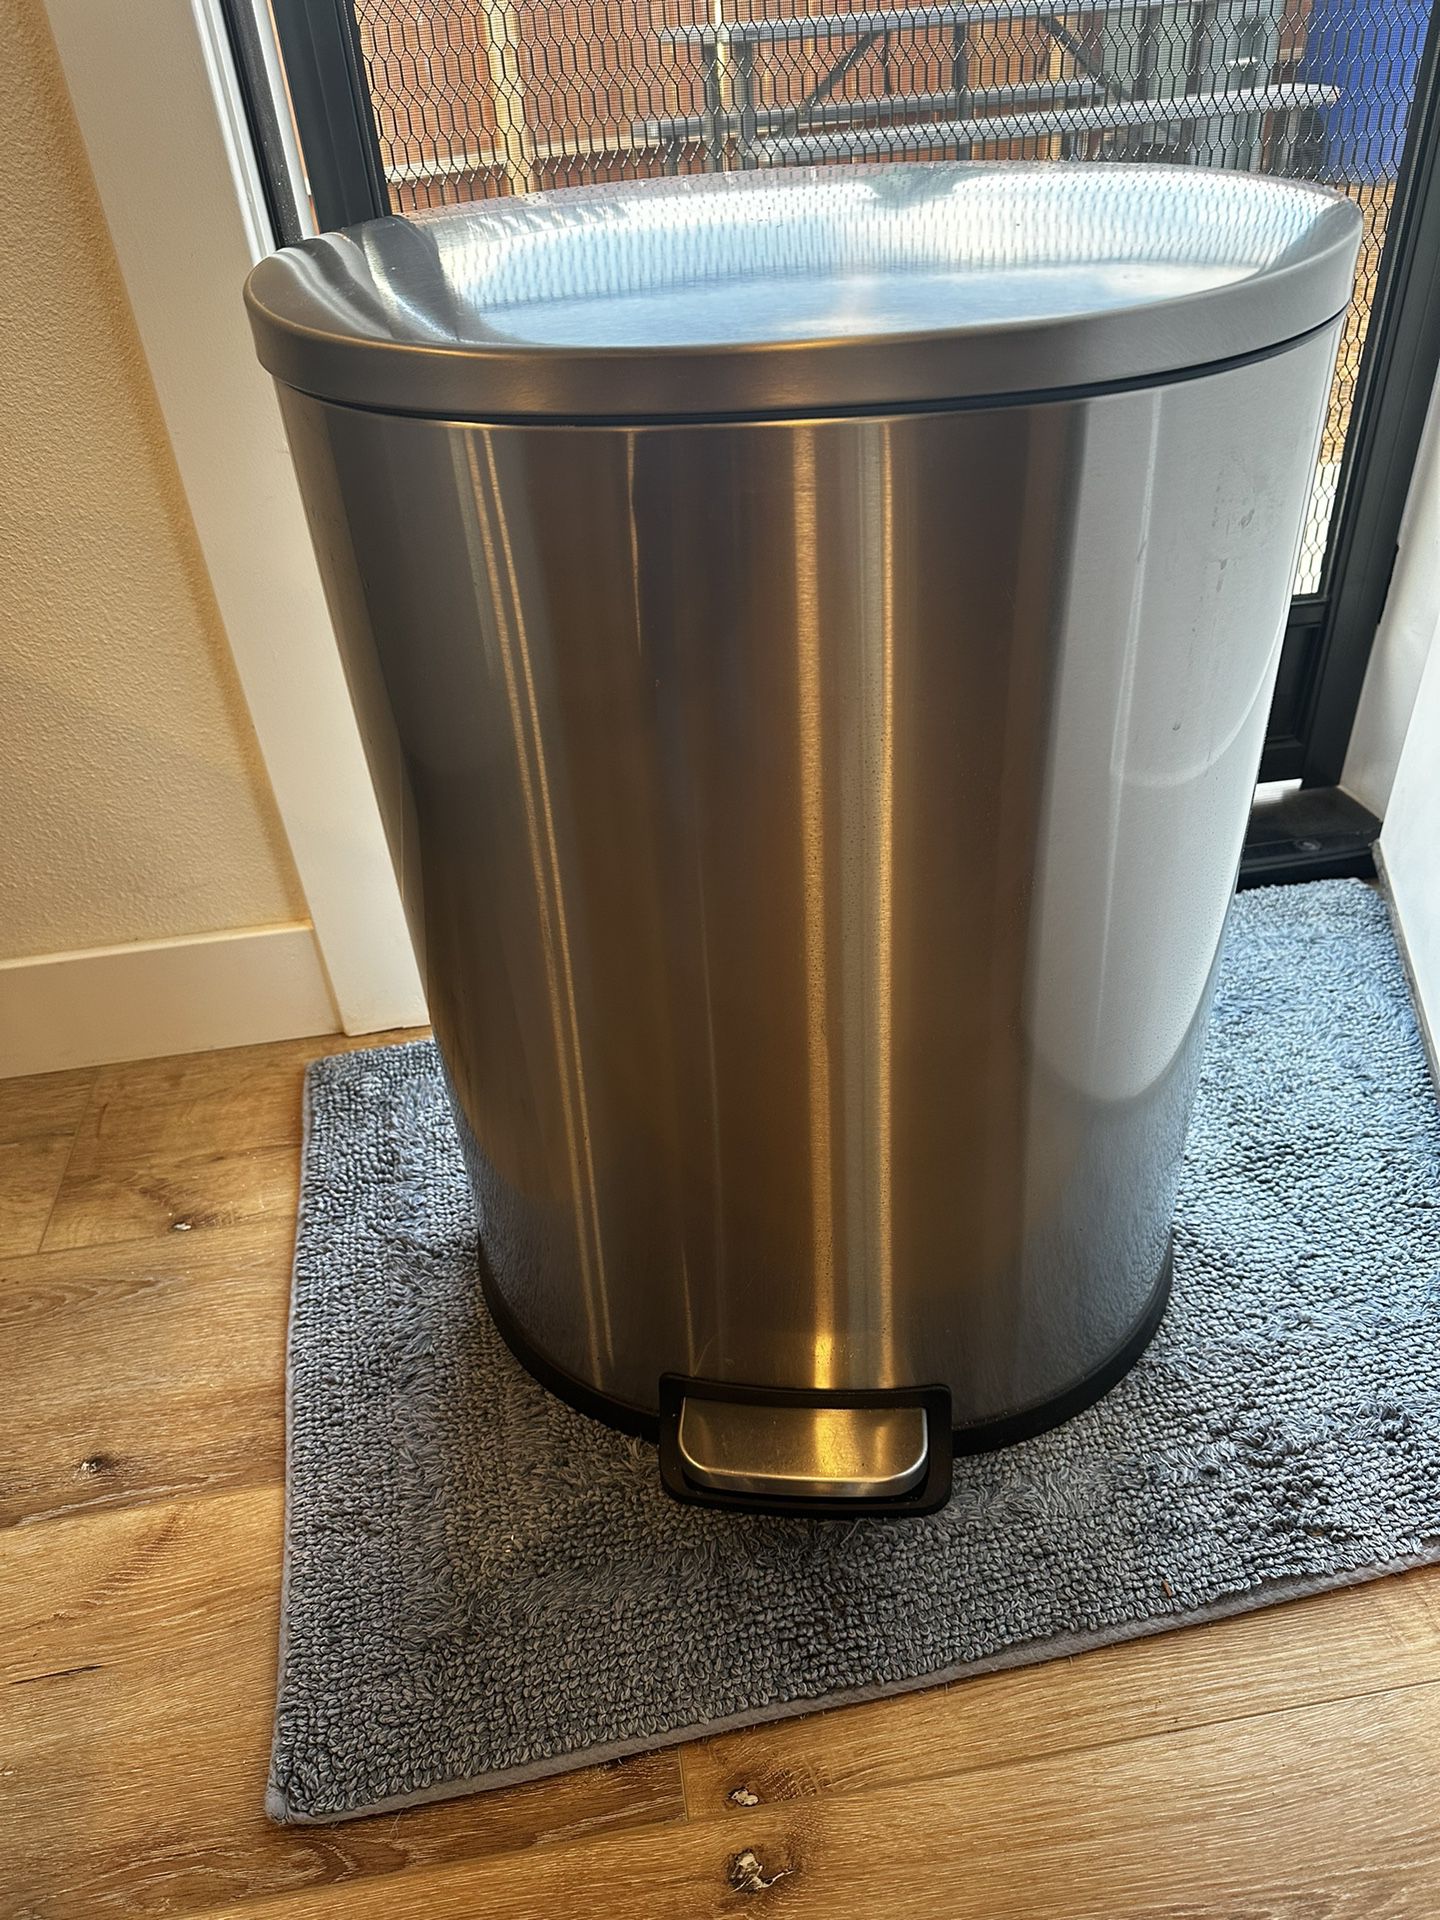 Stainless Steel Trash can 